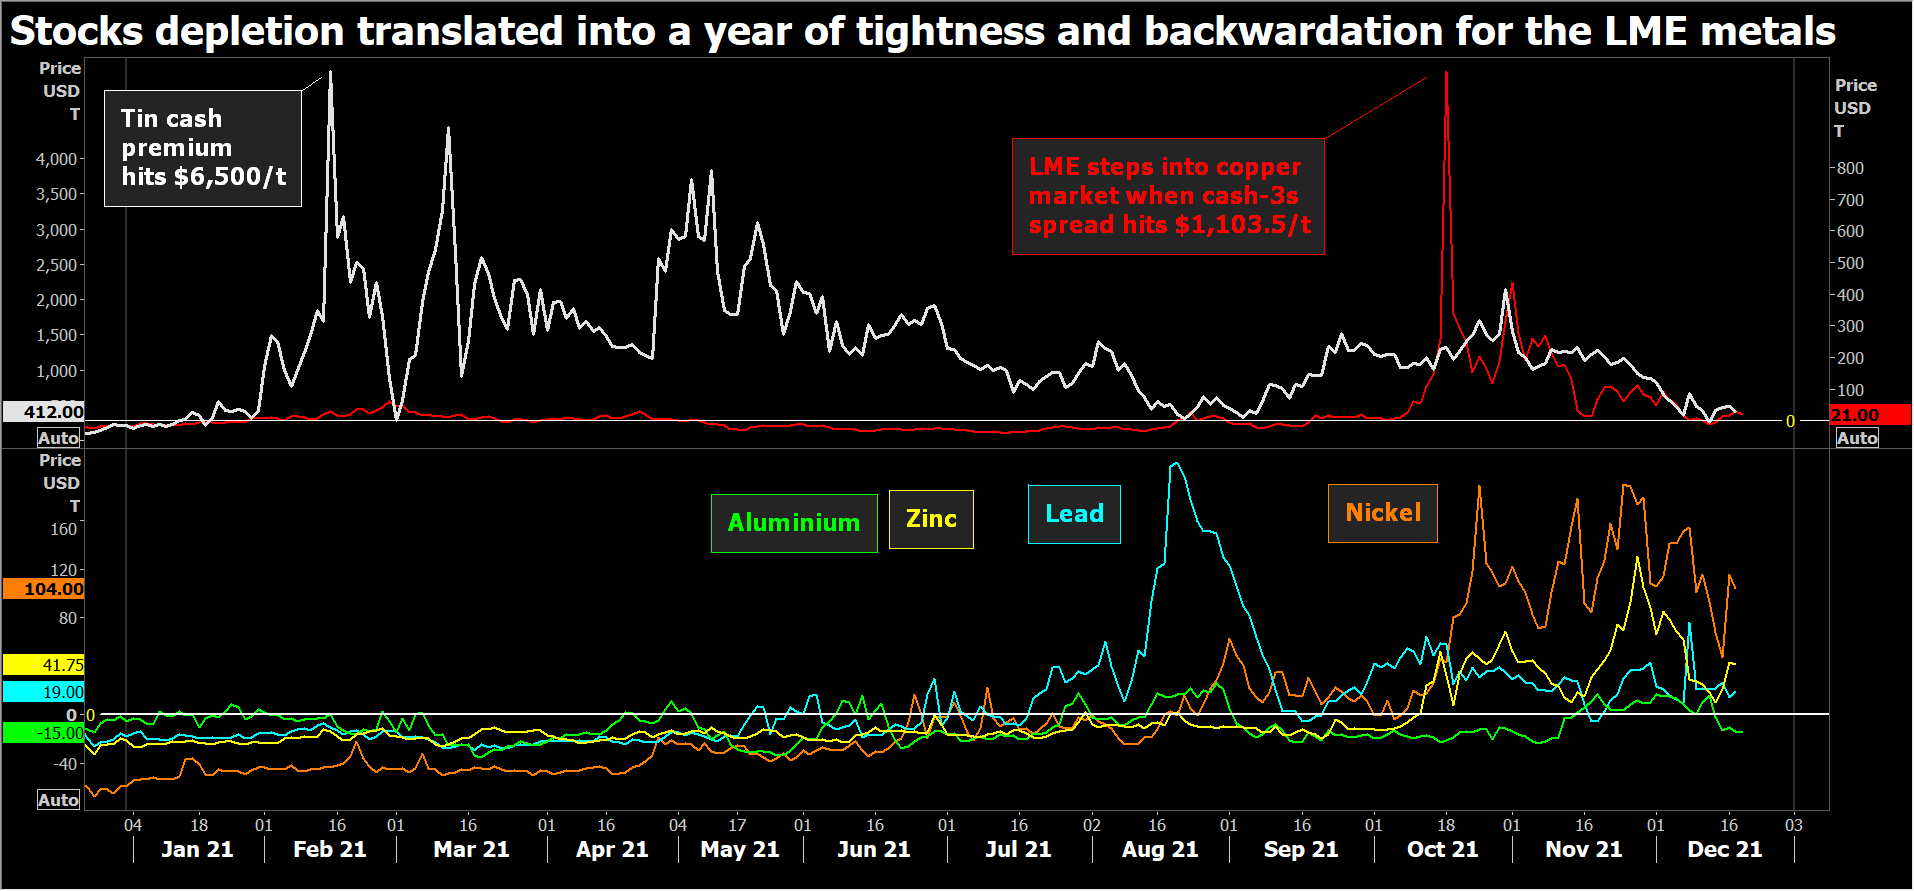 Stocks depletion translated into a year of tightness and bacwardation for the LME metals.